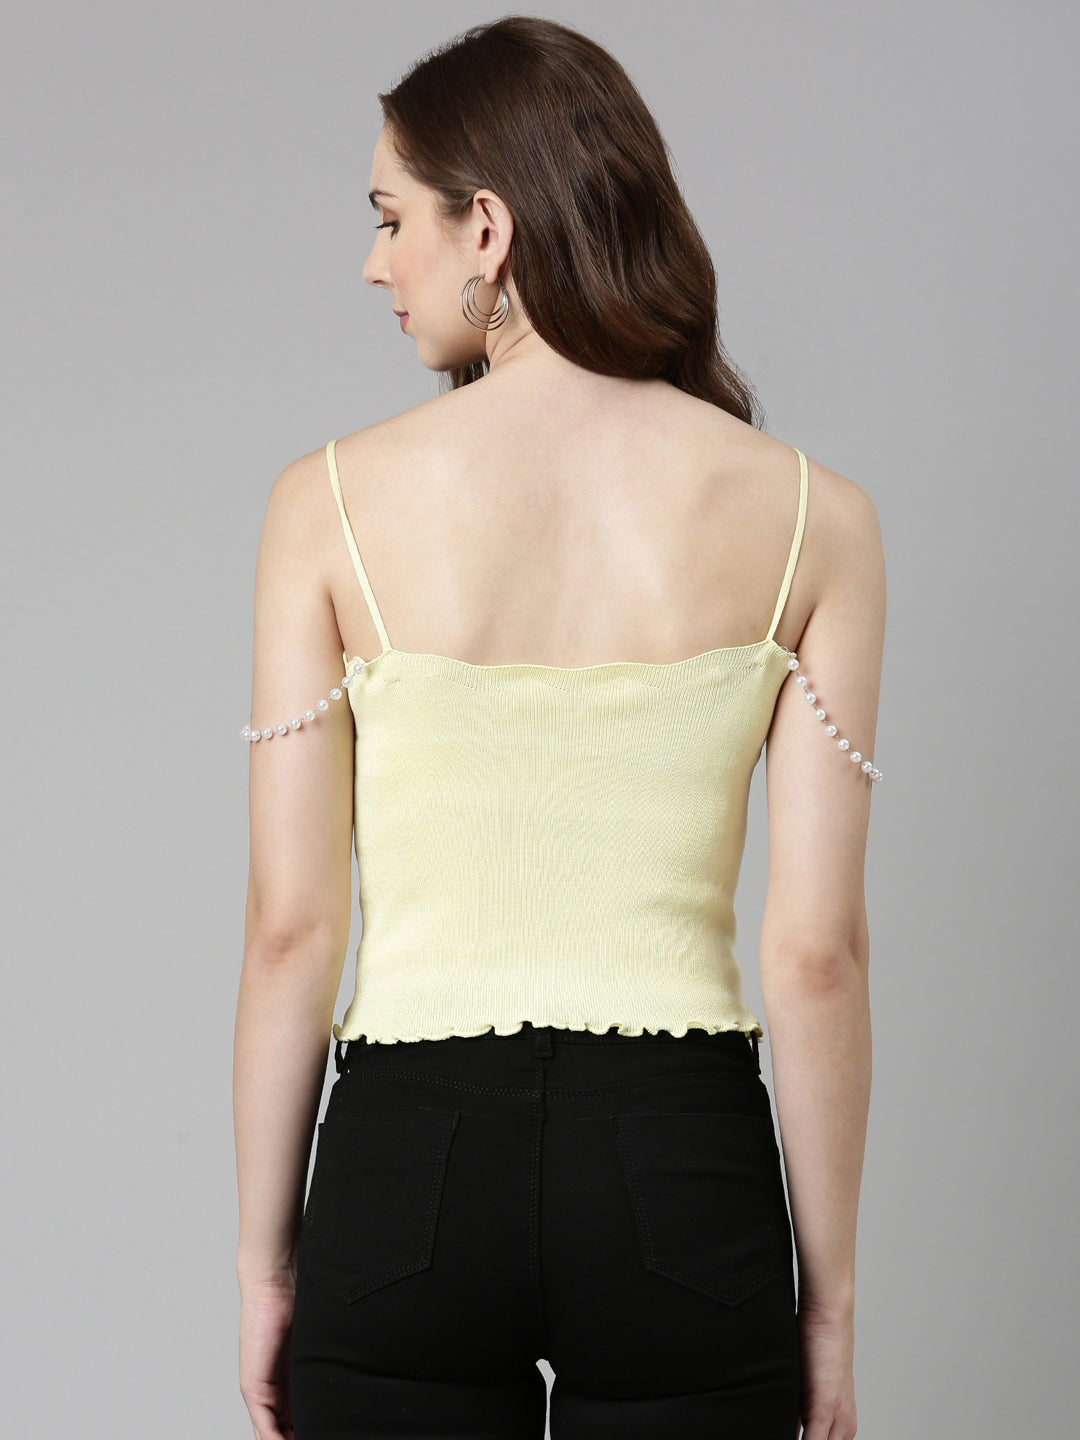 Shoulder Straps Solid Sleeveless Yellow Crop Tank Top